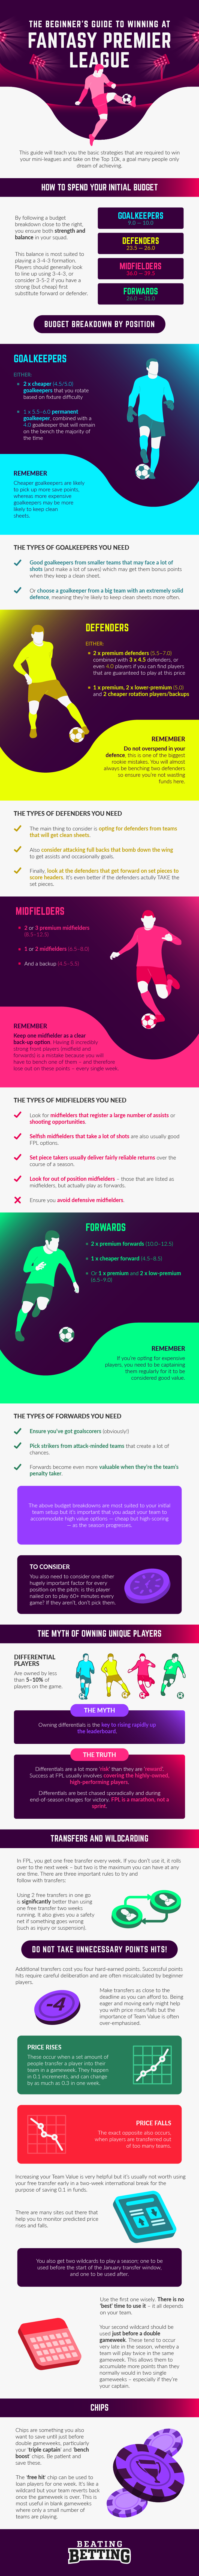 How to Win at Fantasy Premier League [2021 Strategy Guide]